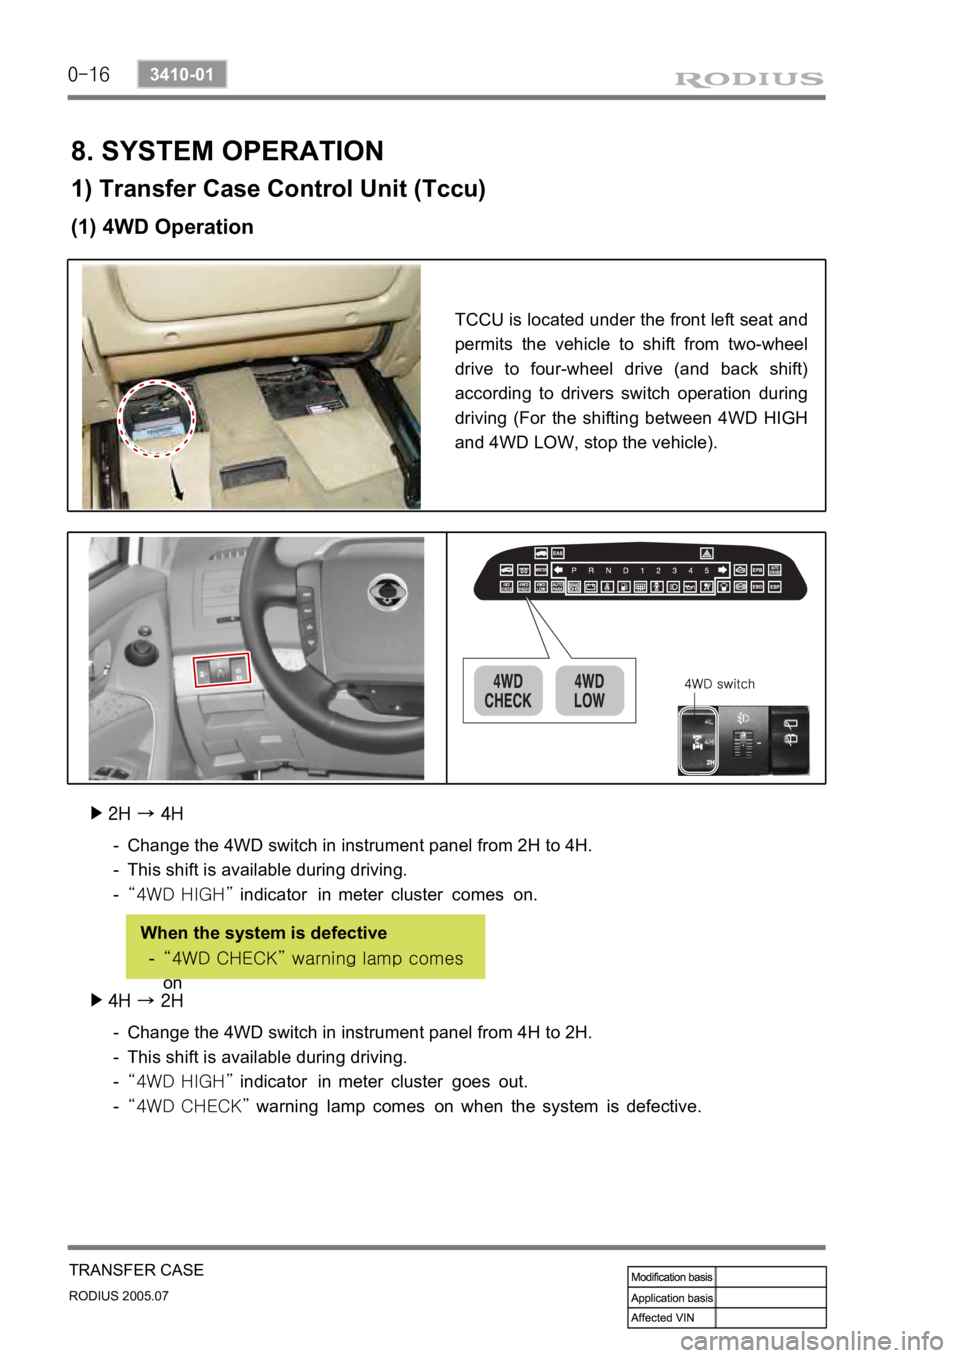 SSANGYONG RODIUS 2005  Service Manual 0-16
RODIUS 2005.07
3410-01
TRANSFER CASE
8. SYSTEM OPERATION
1) Transfer Case Control Unit (Tccu)
(1) 4WD Operation
TCCU is located under the front left seat and 
permits the vehicle to shift from tw